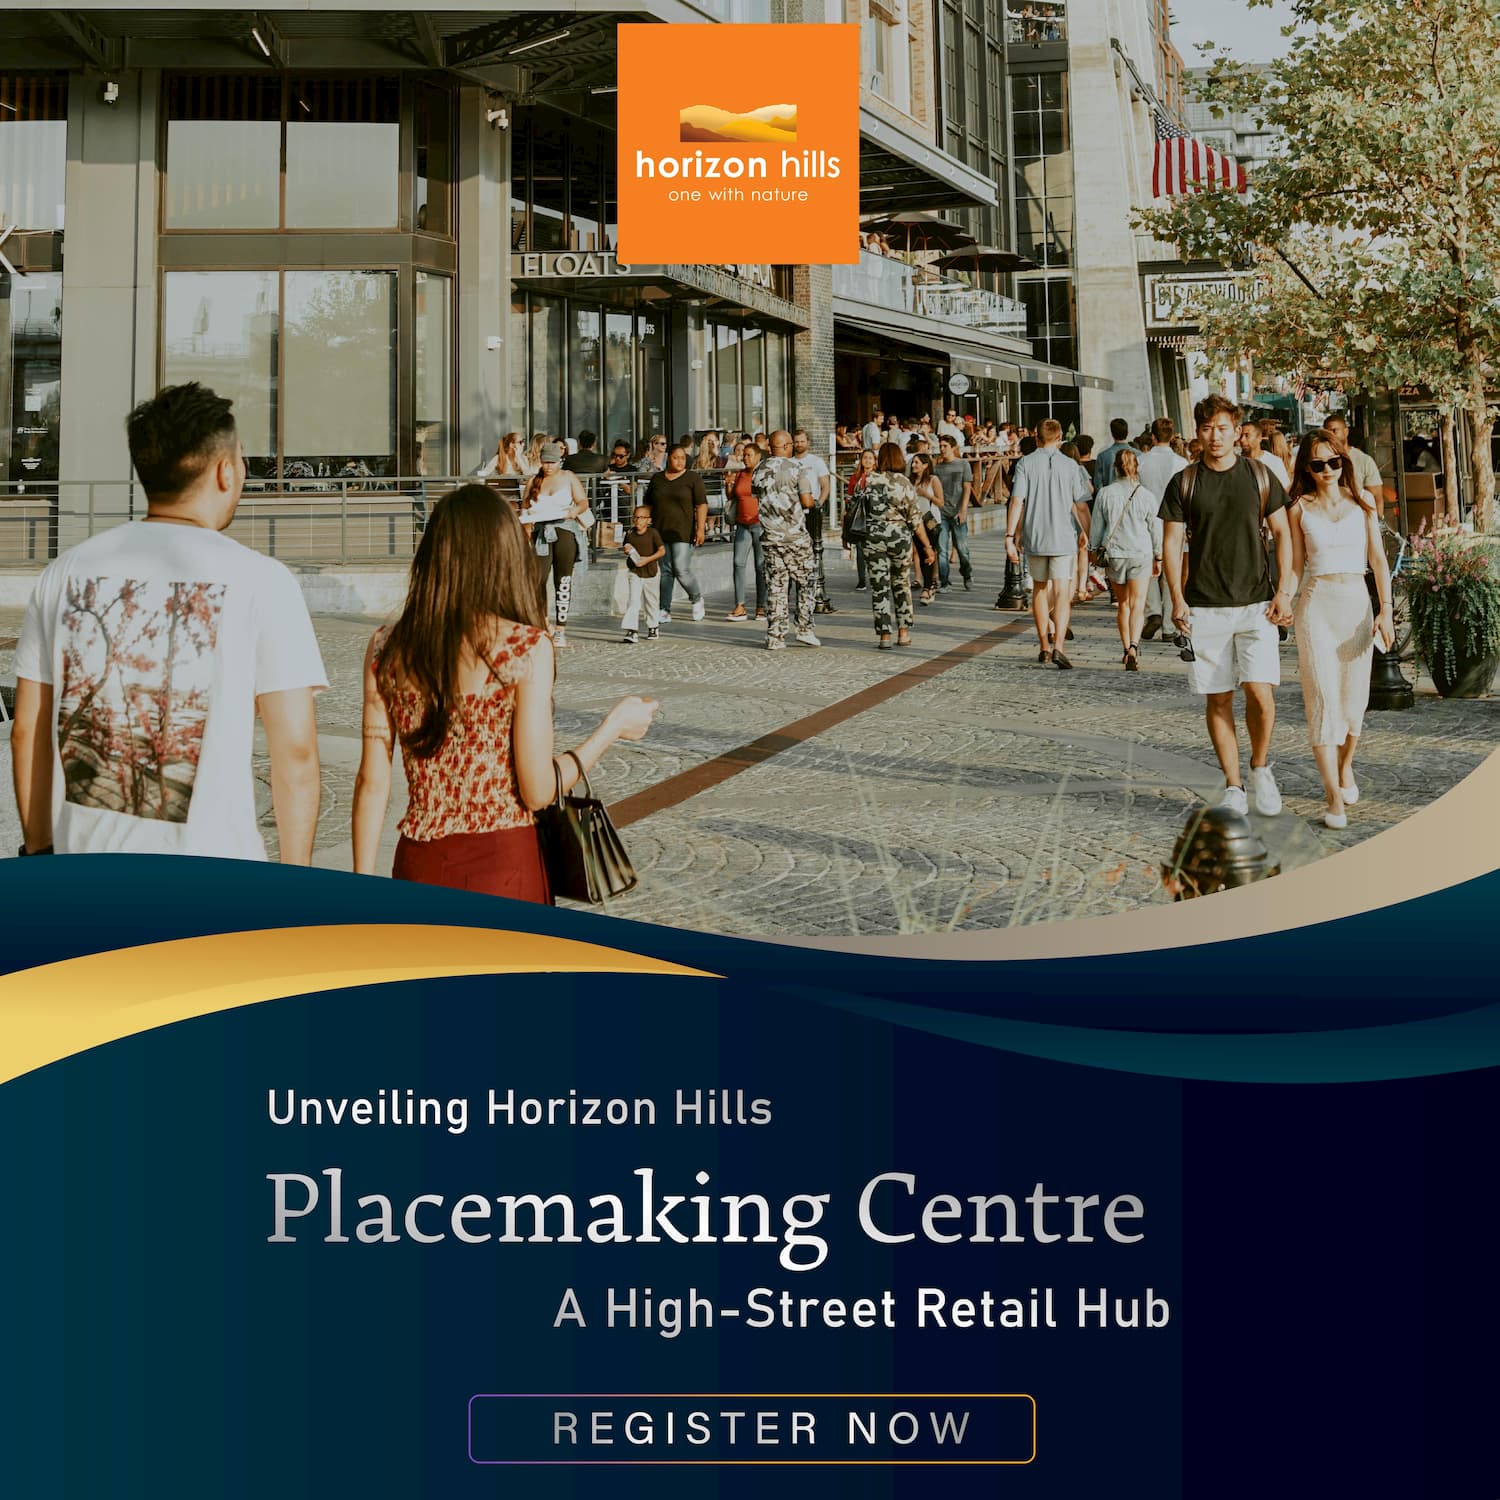 Townsquare Placemaking Centre